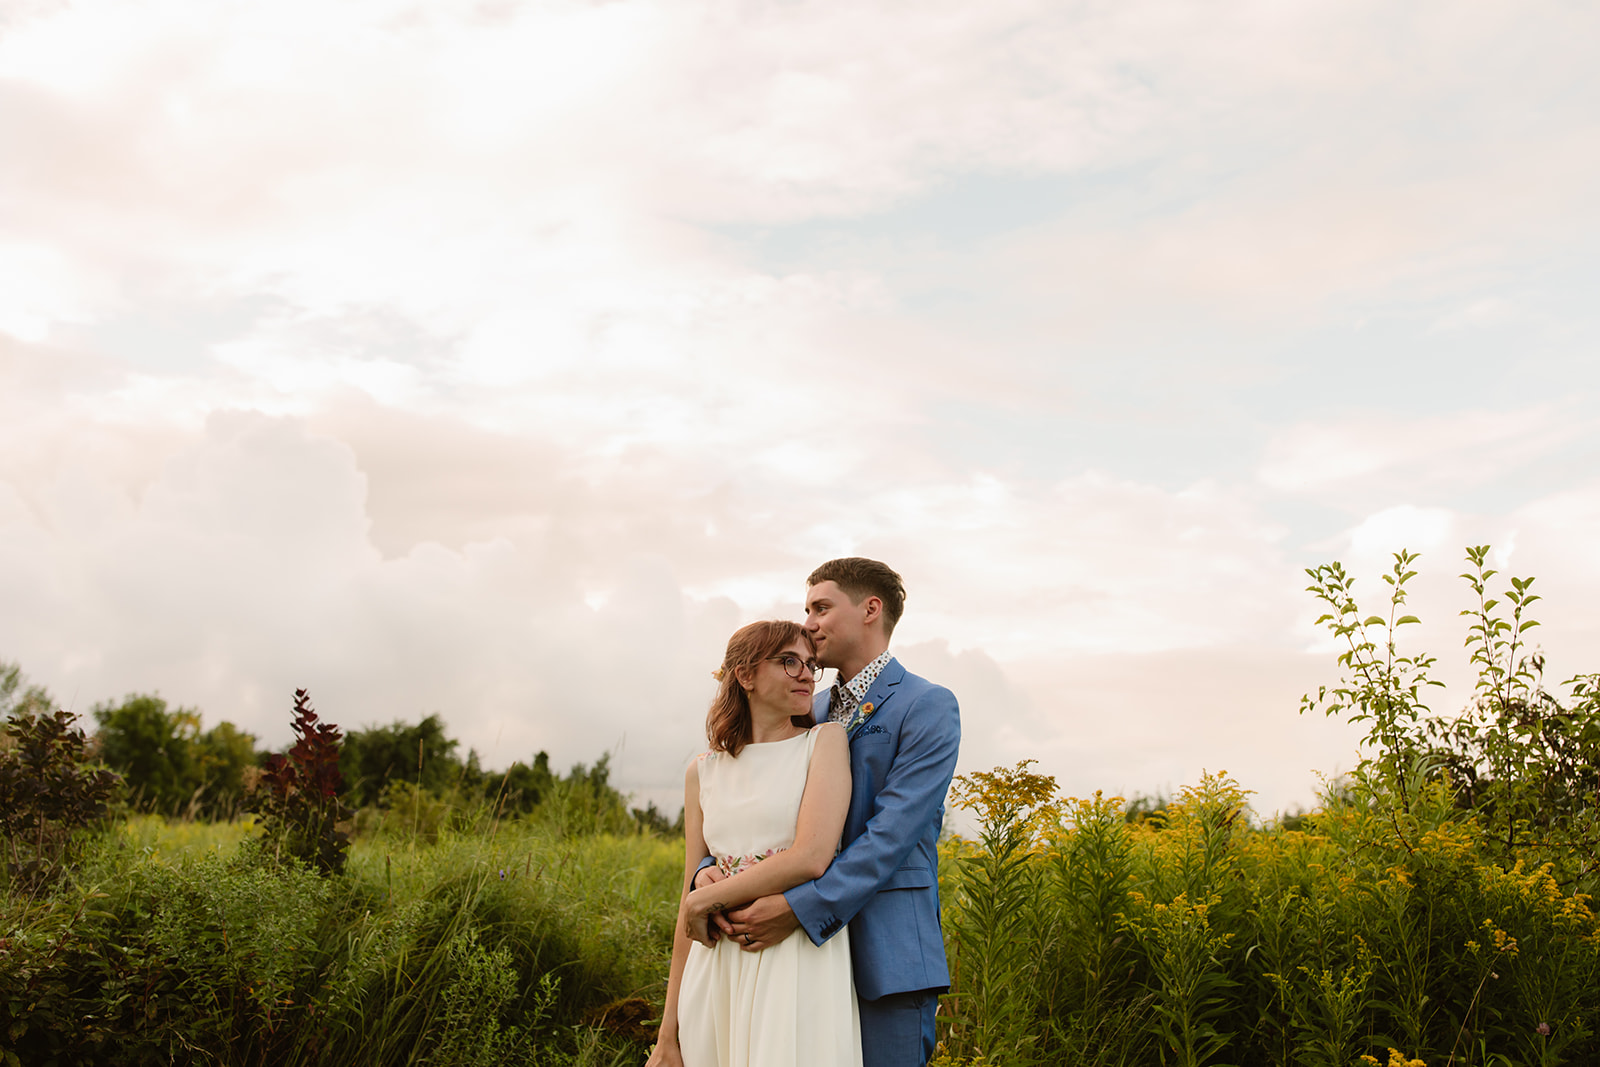 intimate wedding at 100 acre wood, picton